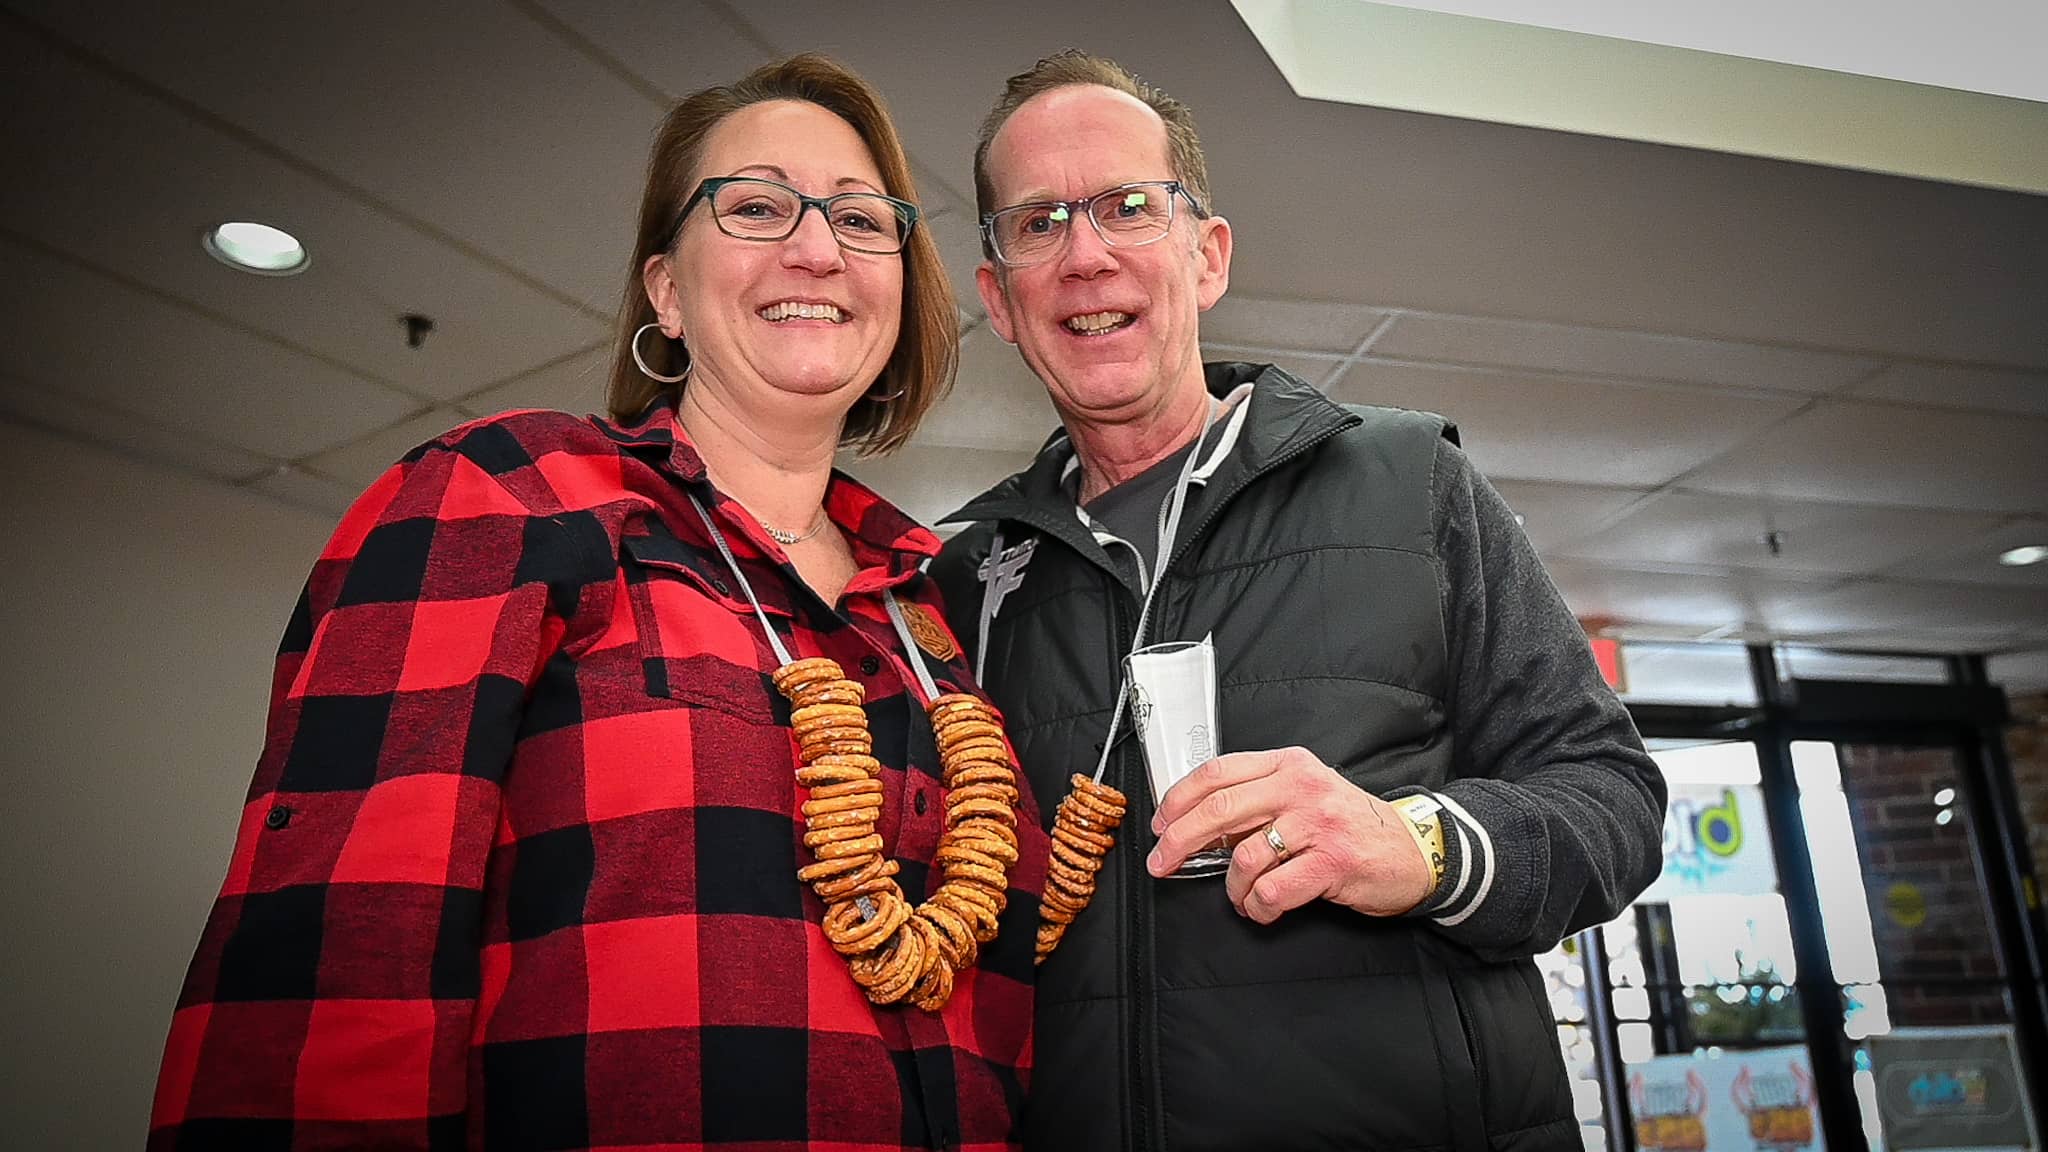 Kim and Chris White show off their pretzel necklaces on Saturday, Feb. 4, 2023, at 815 Ale Fest at the Tebala Event Center. (Photo by Kevin Haas/Rock River Current)